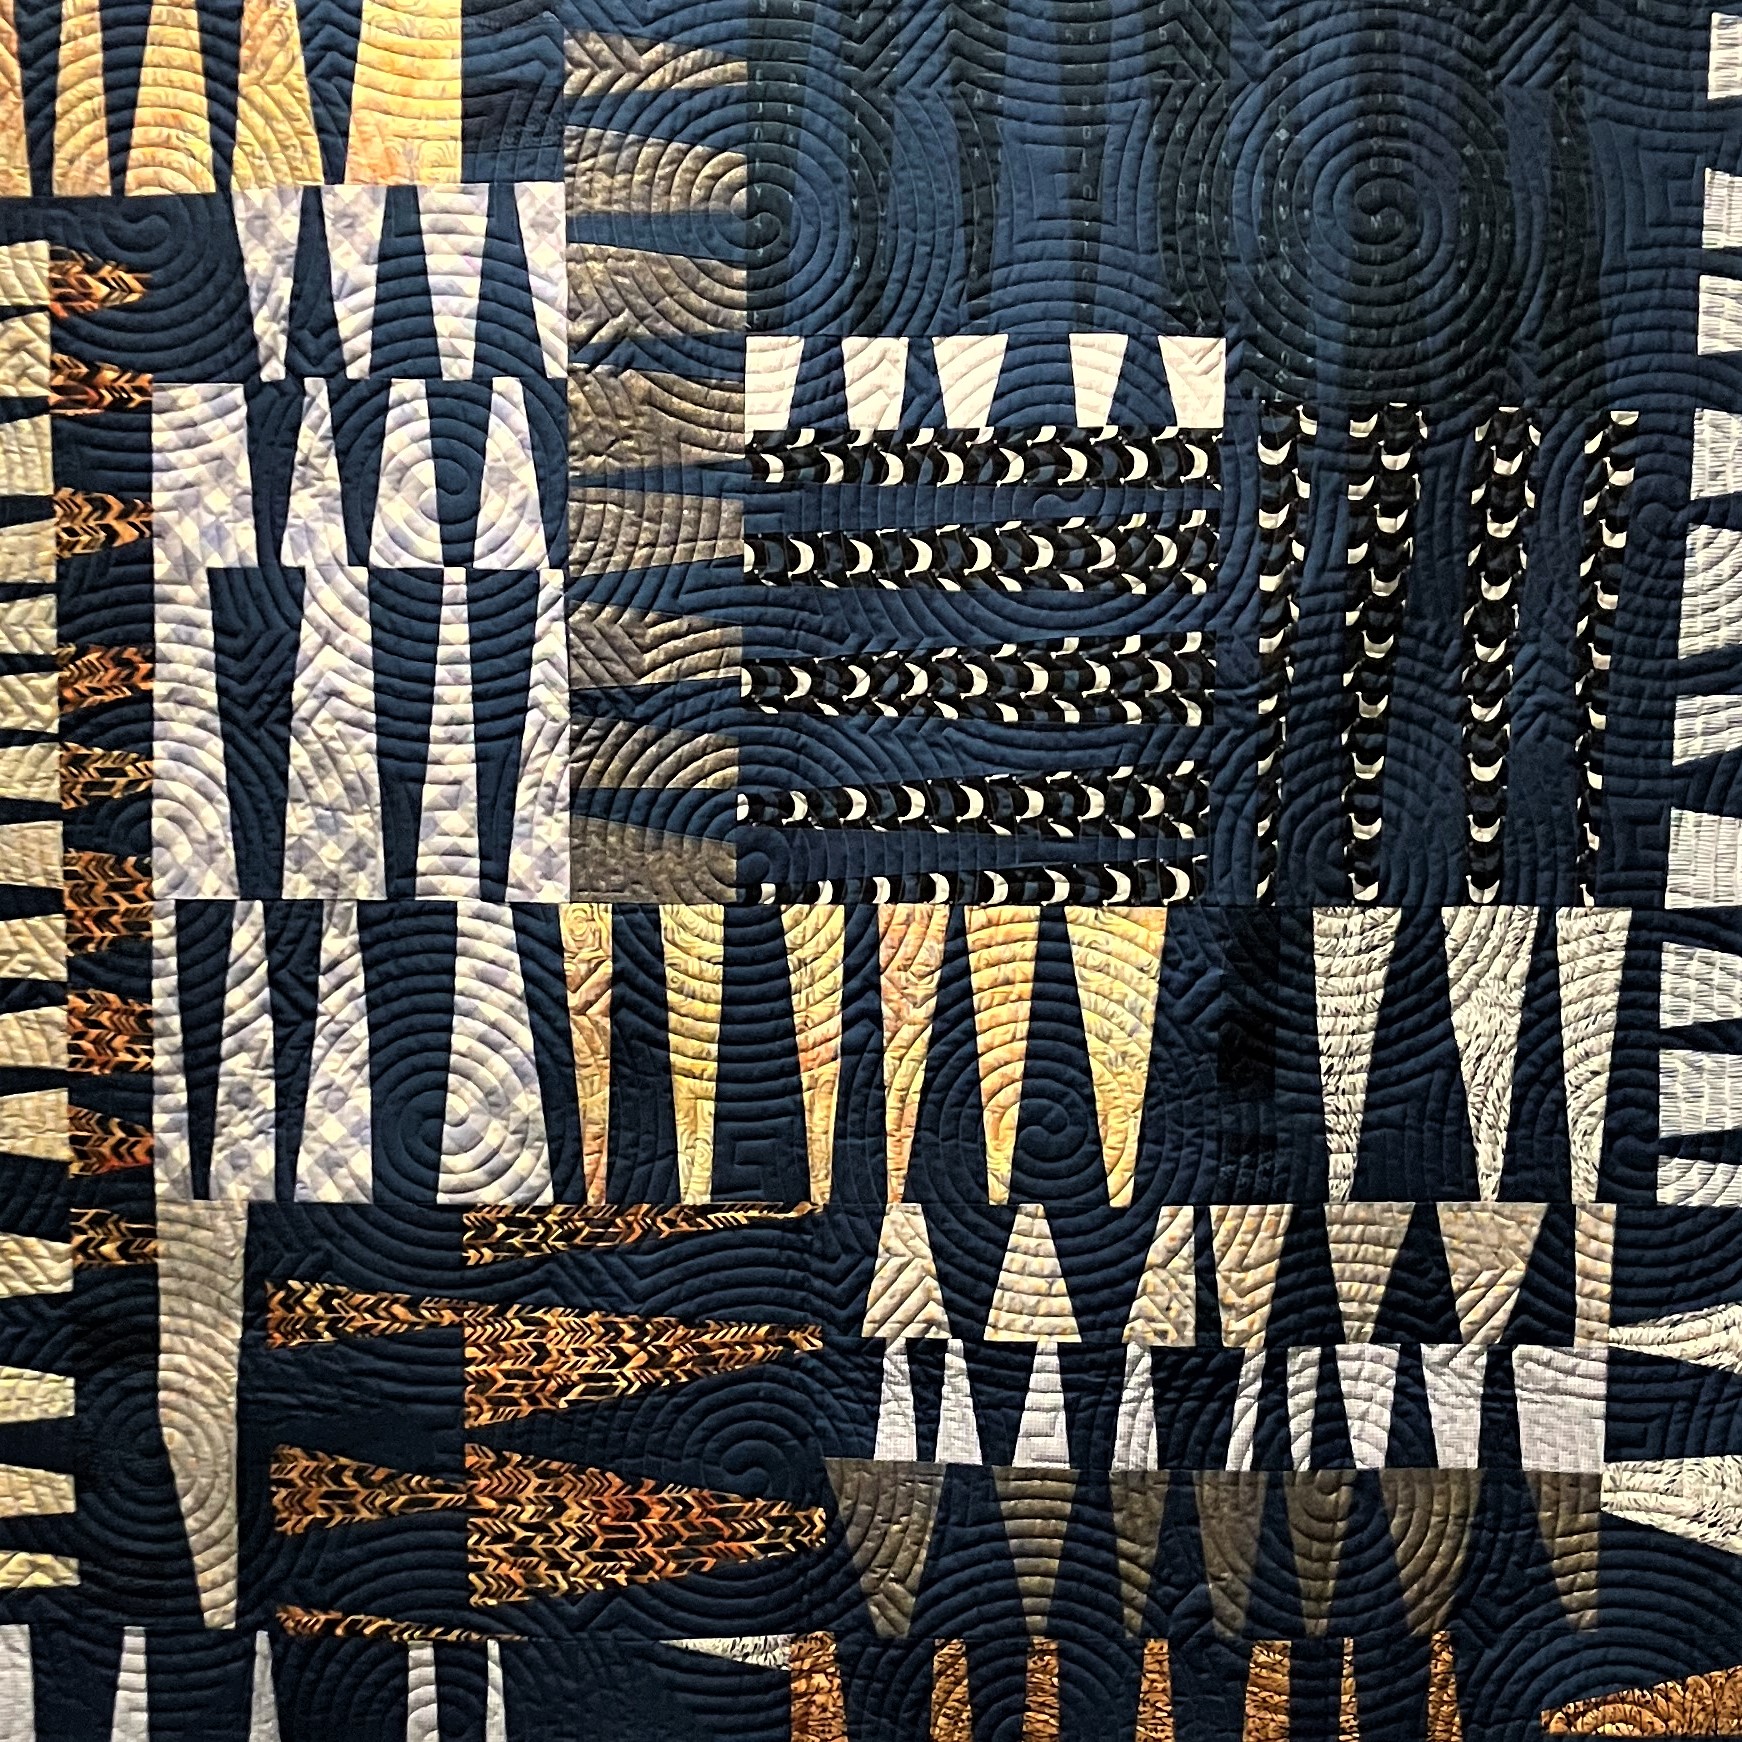 Juneau Modern Quilt Guild Exhibition February 2nd-24th